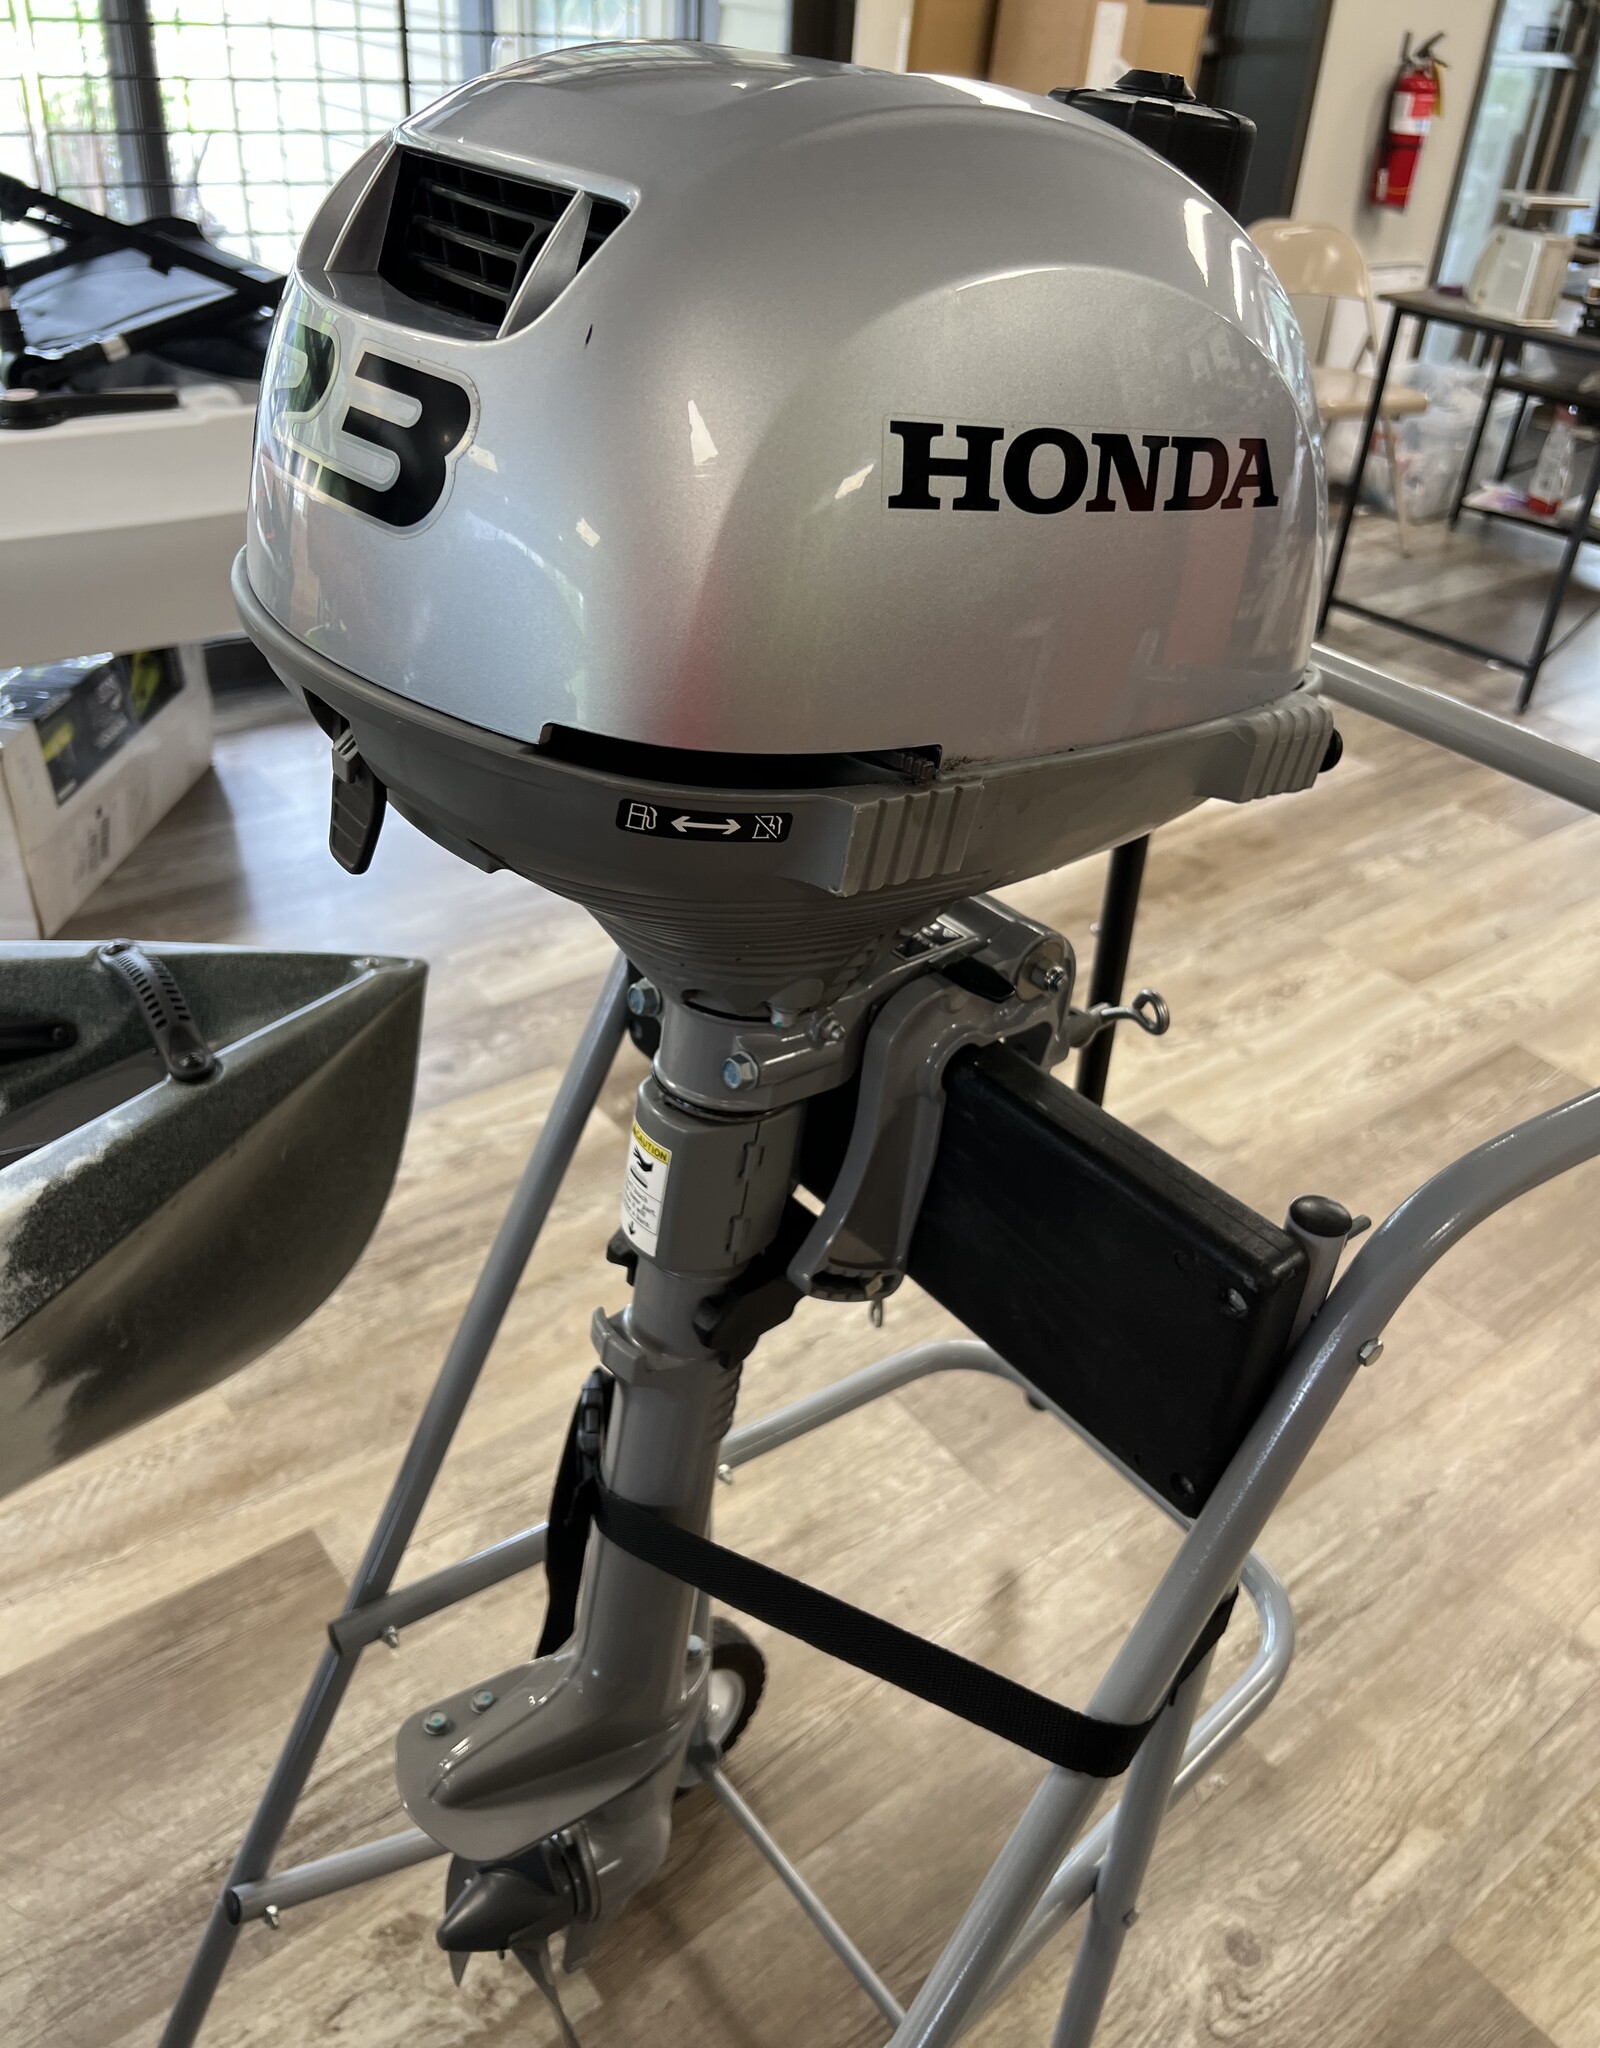 Used Honda 2.3 Outboard Motor with Cart